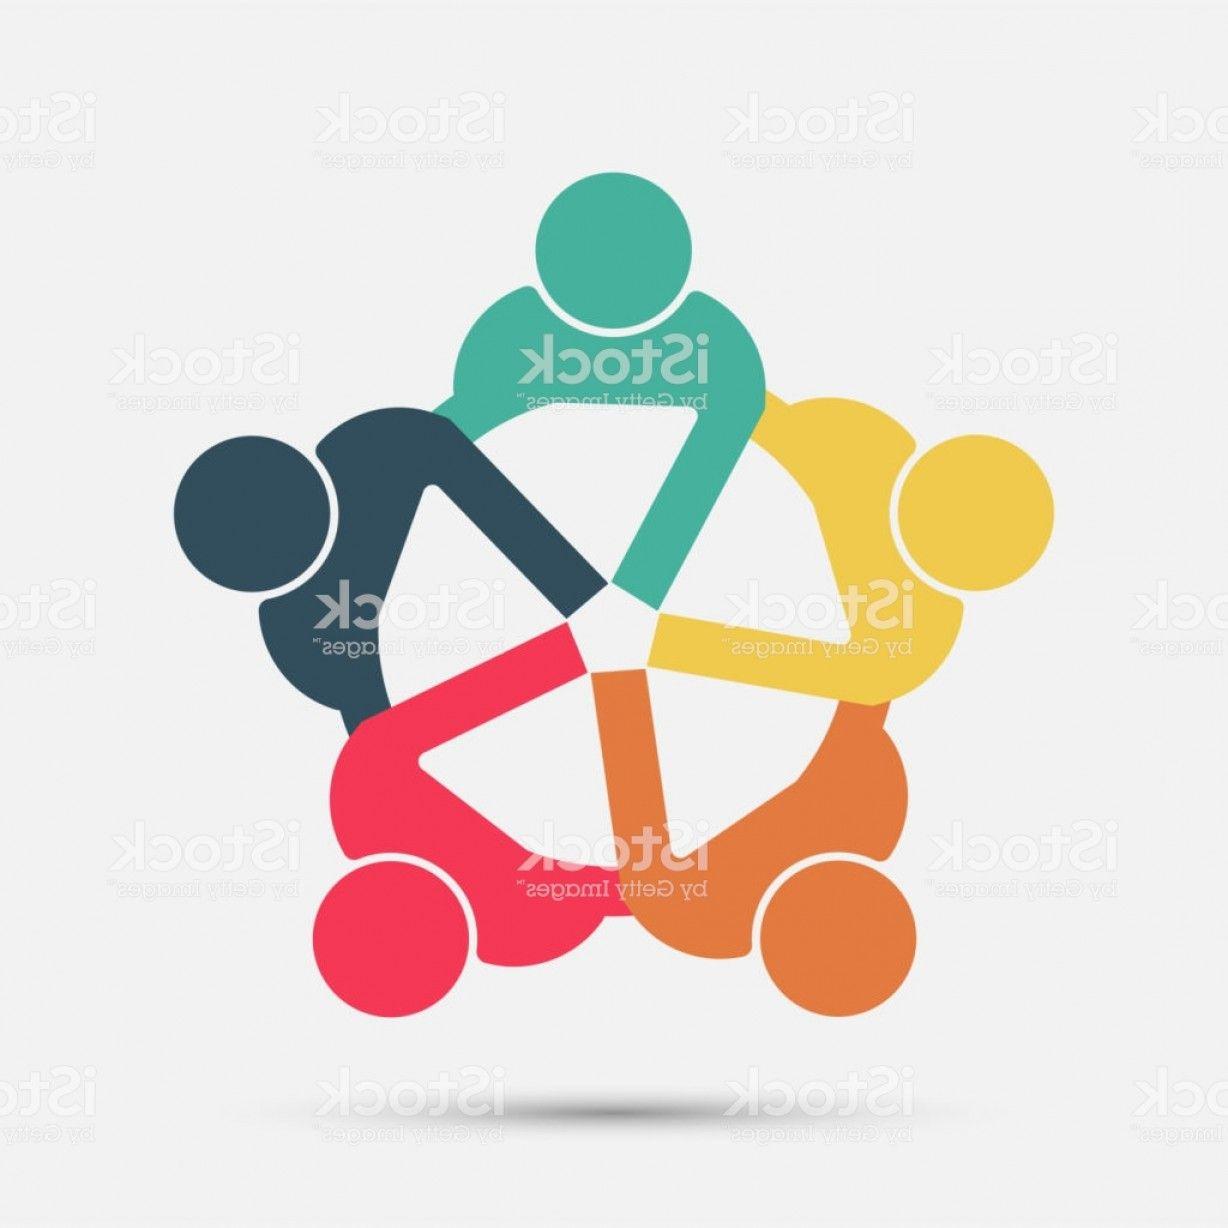 Group of People Logo - Meeting Room People Logo Group Of Four Persons In Circle Gm | SOIDERGI